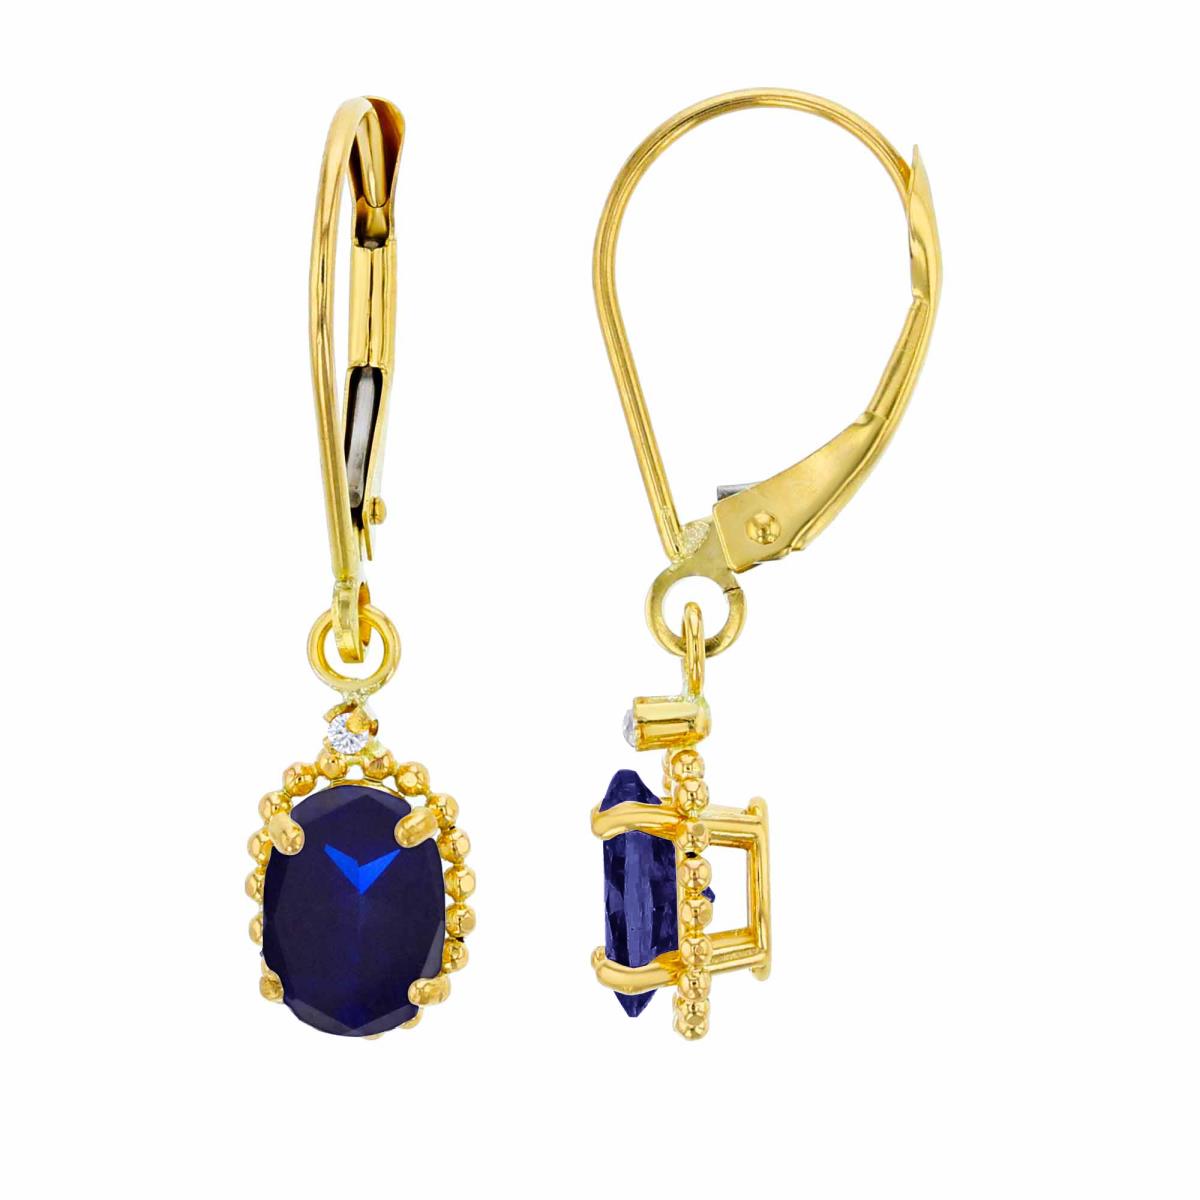 10K Yellow Gold 1.25mm Rd White Topaz & 6x4mm Ov Created Blue Sapphire Bead Frame Drop Lever-Back Earring